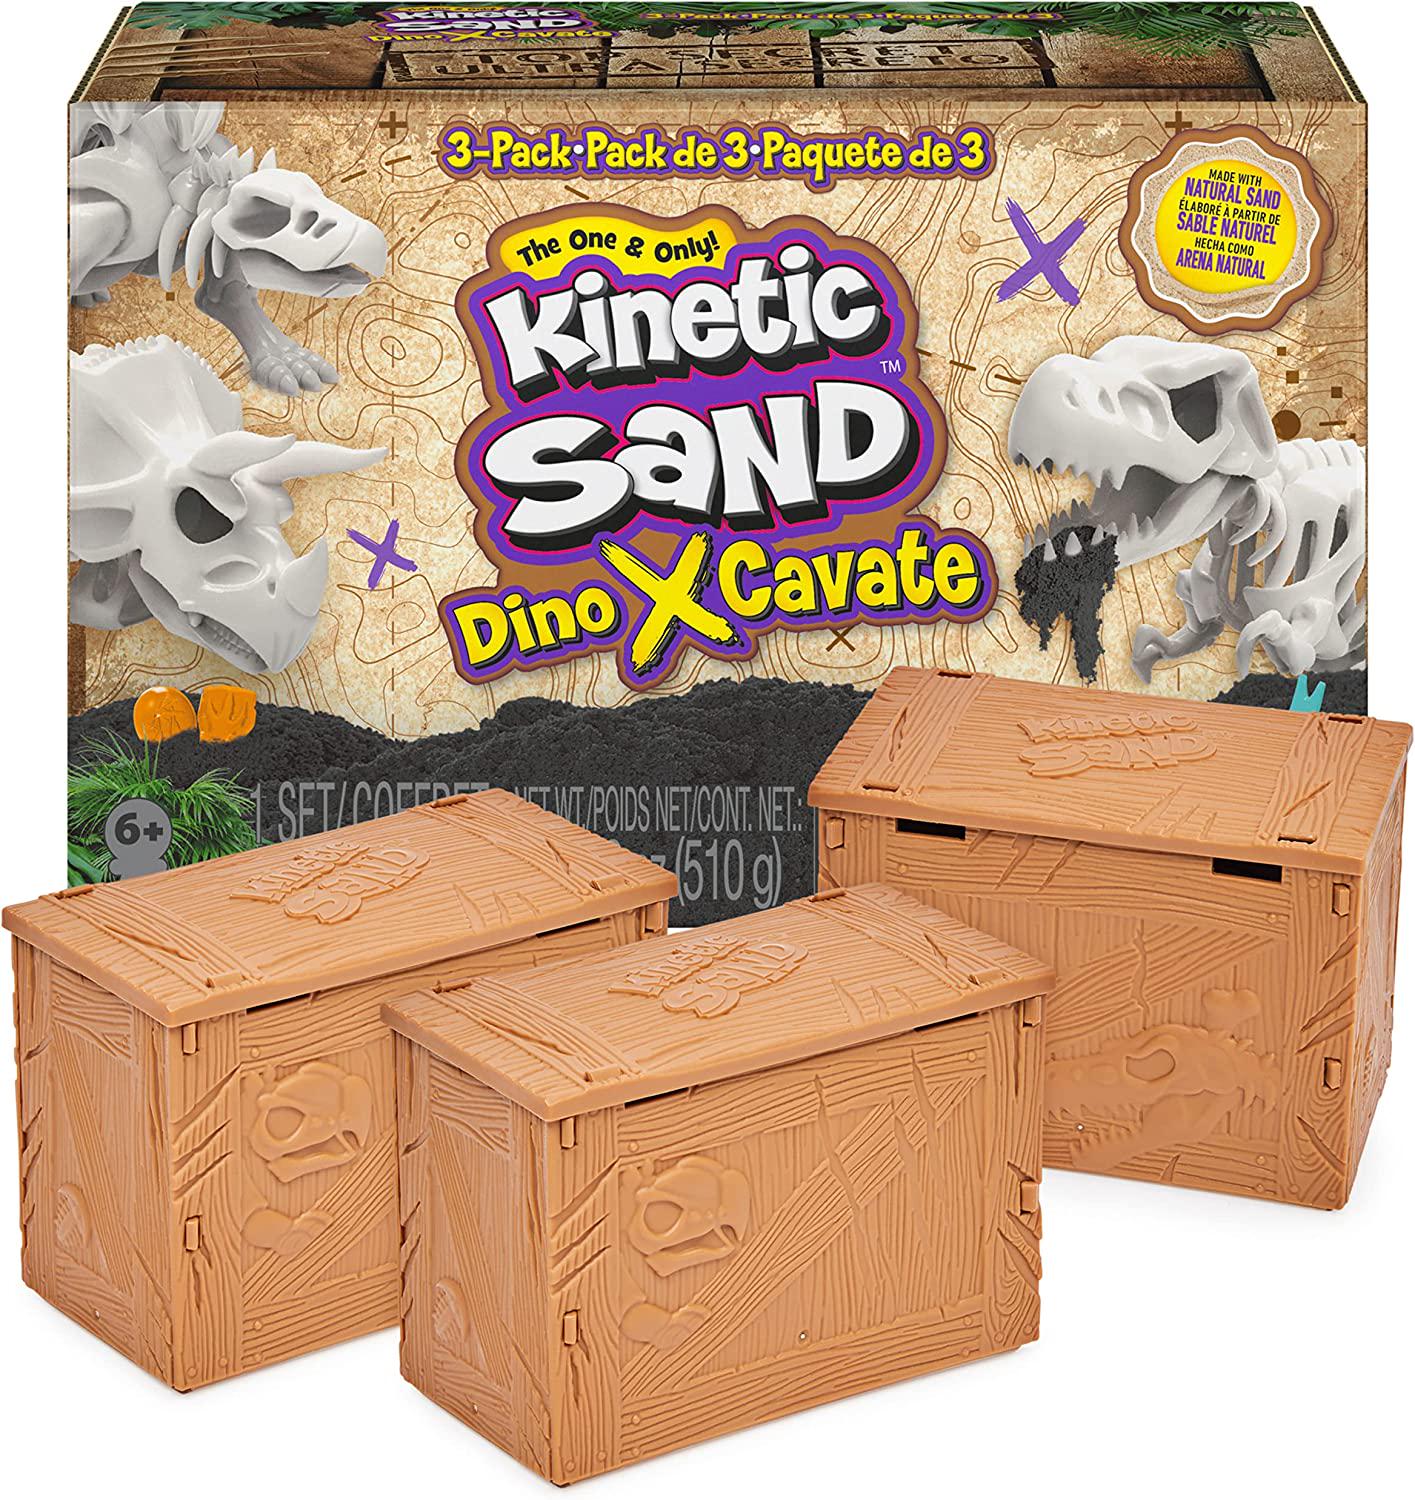 Kinetic Sand, Kinetic Sand, Dino XCavate 3-Pack, Made with Natural Sand, Play Sand Sensory Toys